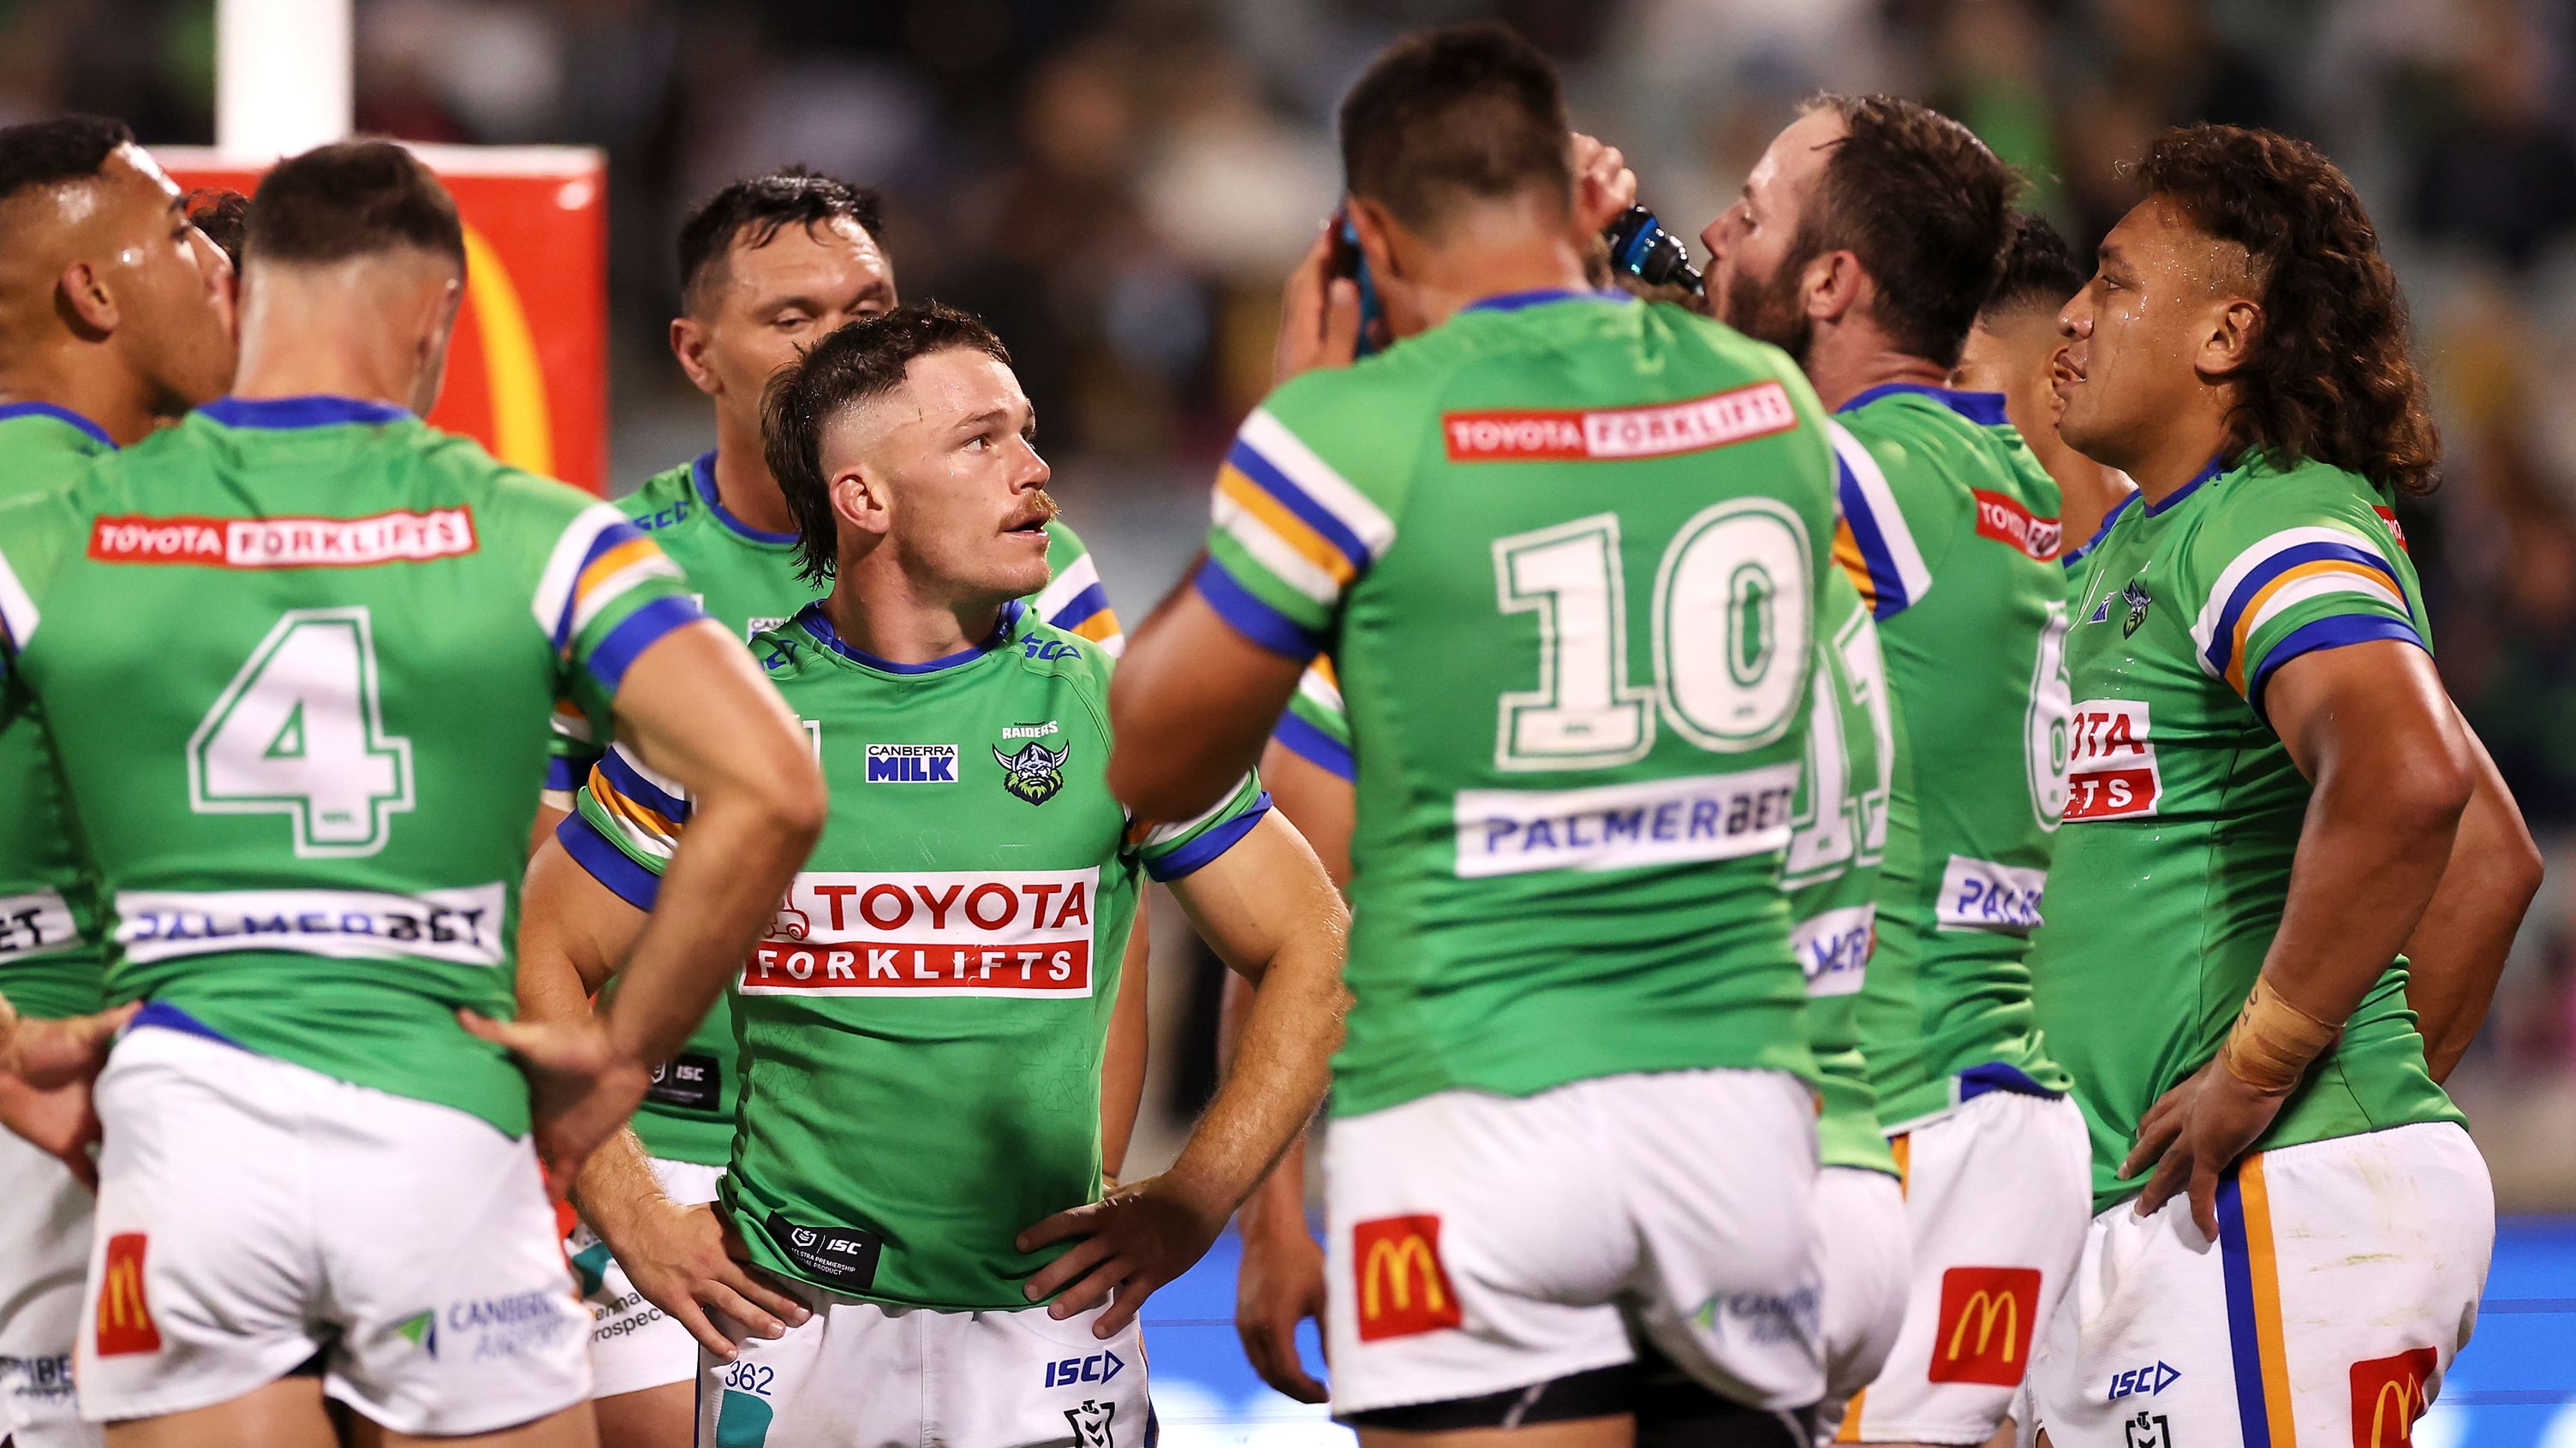 CANBERRA, AUSTRALIA - MARCH 31: Tom Starling of the Raiders and his team mates looks dejected after a Panthers try during the round five NRL match between Canberra Raiders and Parramatta Eels at GIO Stadium on March 31, 2023 in Canberra, Australia. (Photo by Mark Kolbe/Getty Images)